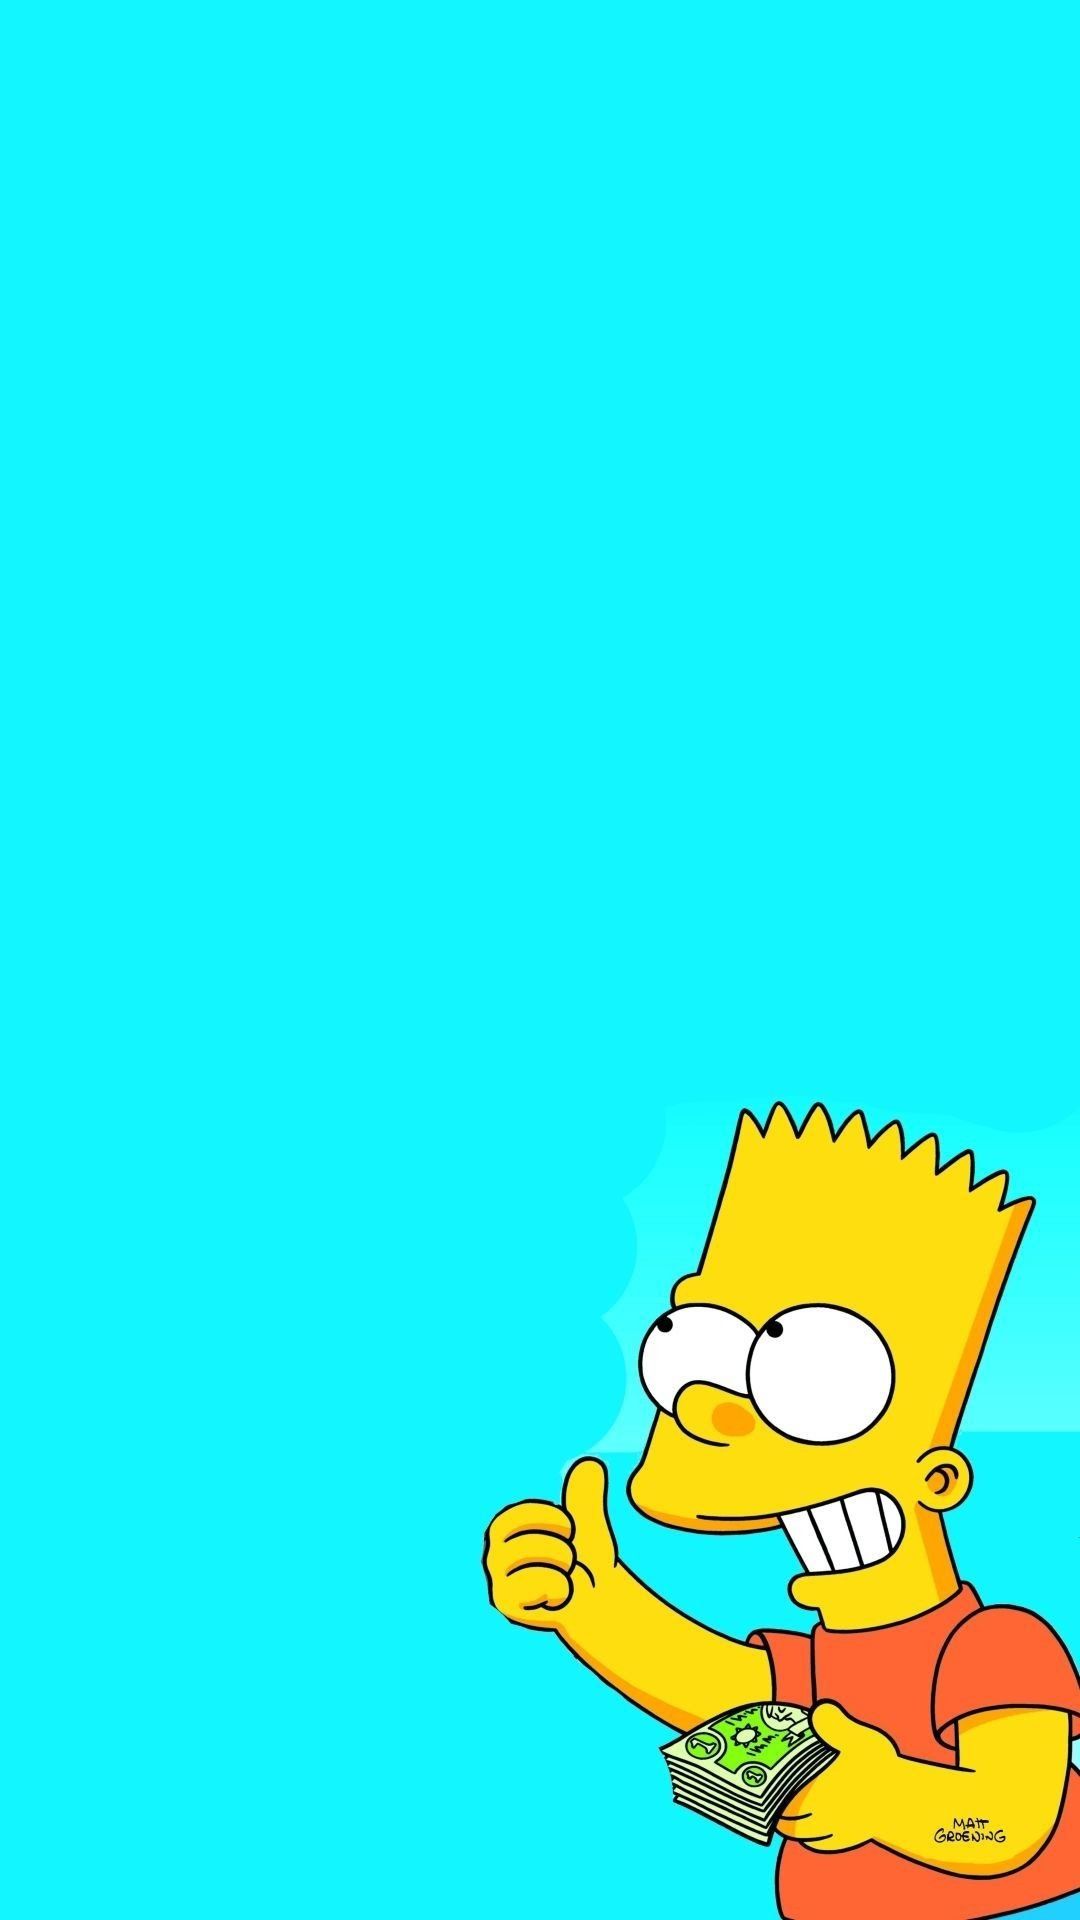 The simpsons wallpaper 1920x853 - The Simpsons